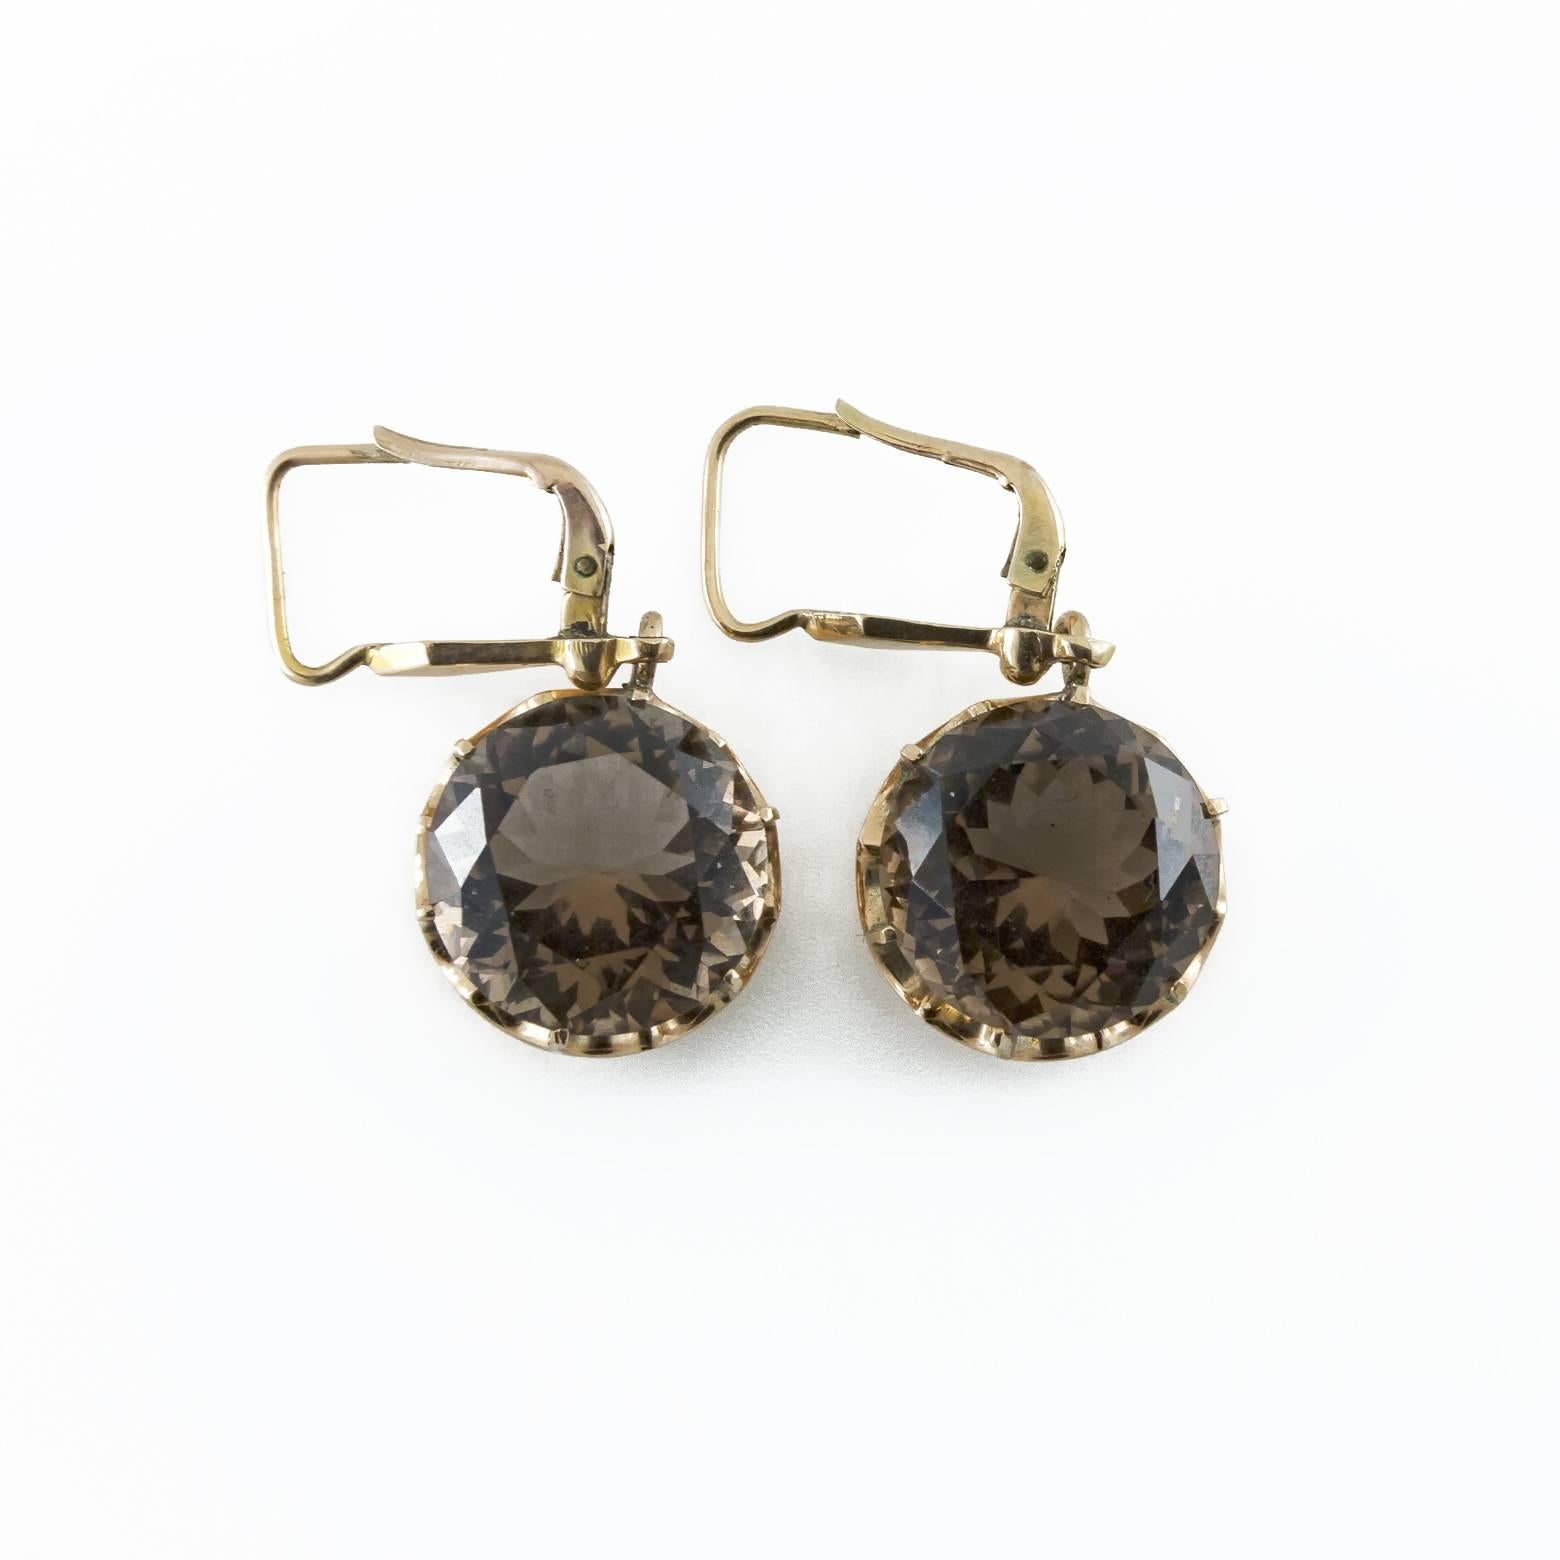 These beautiful nine carat smokey quartz earrings are from 1960's and are absolutely stunning! A rich coffee color faceted and gorgeous. Set in 9K yellow gold. 